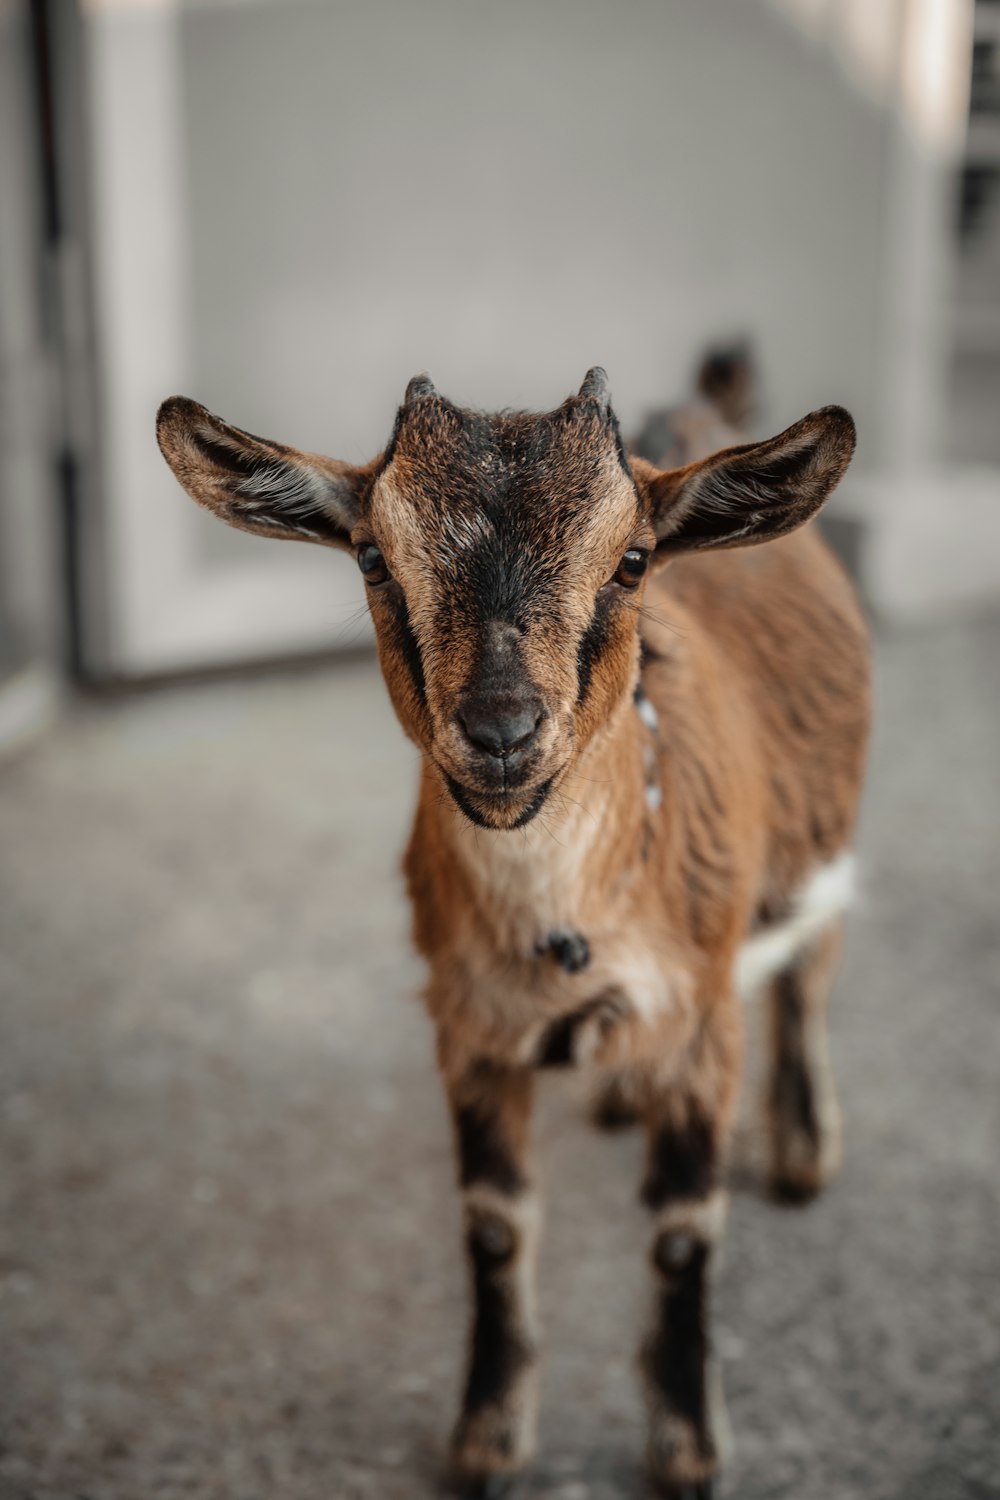 a baby goat standing